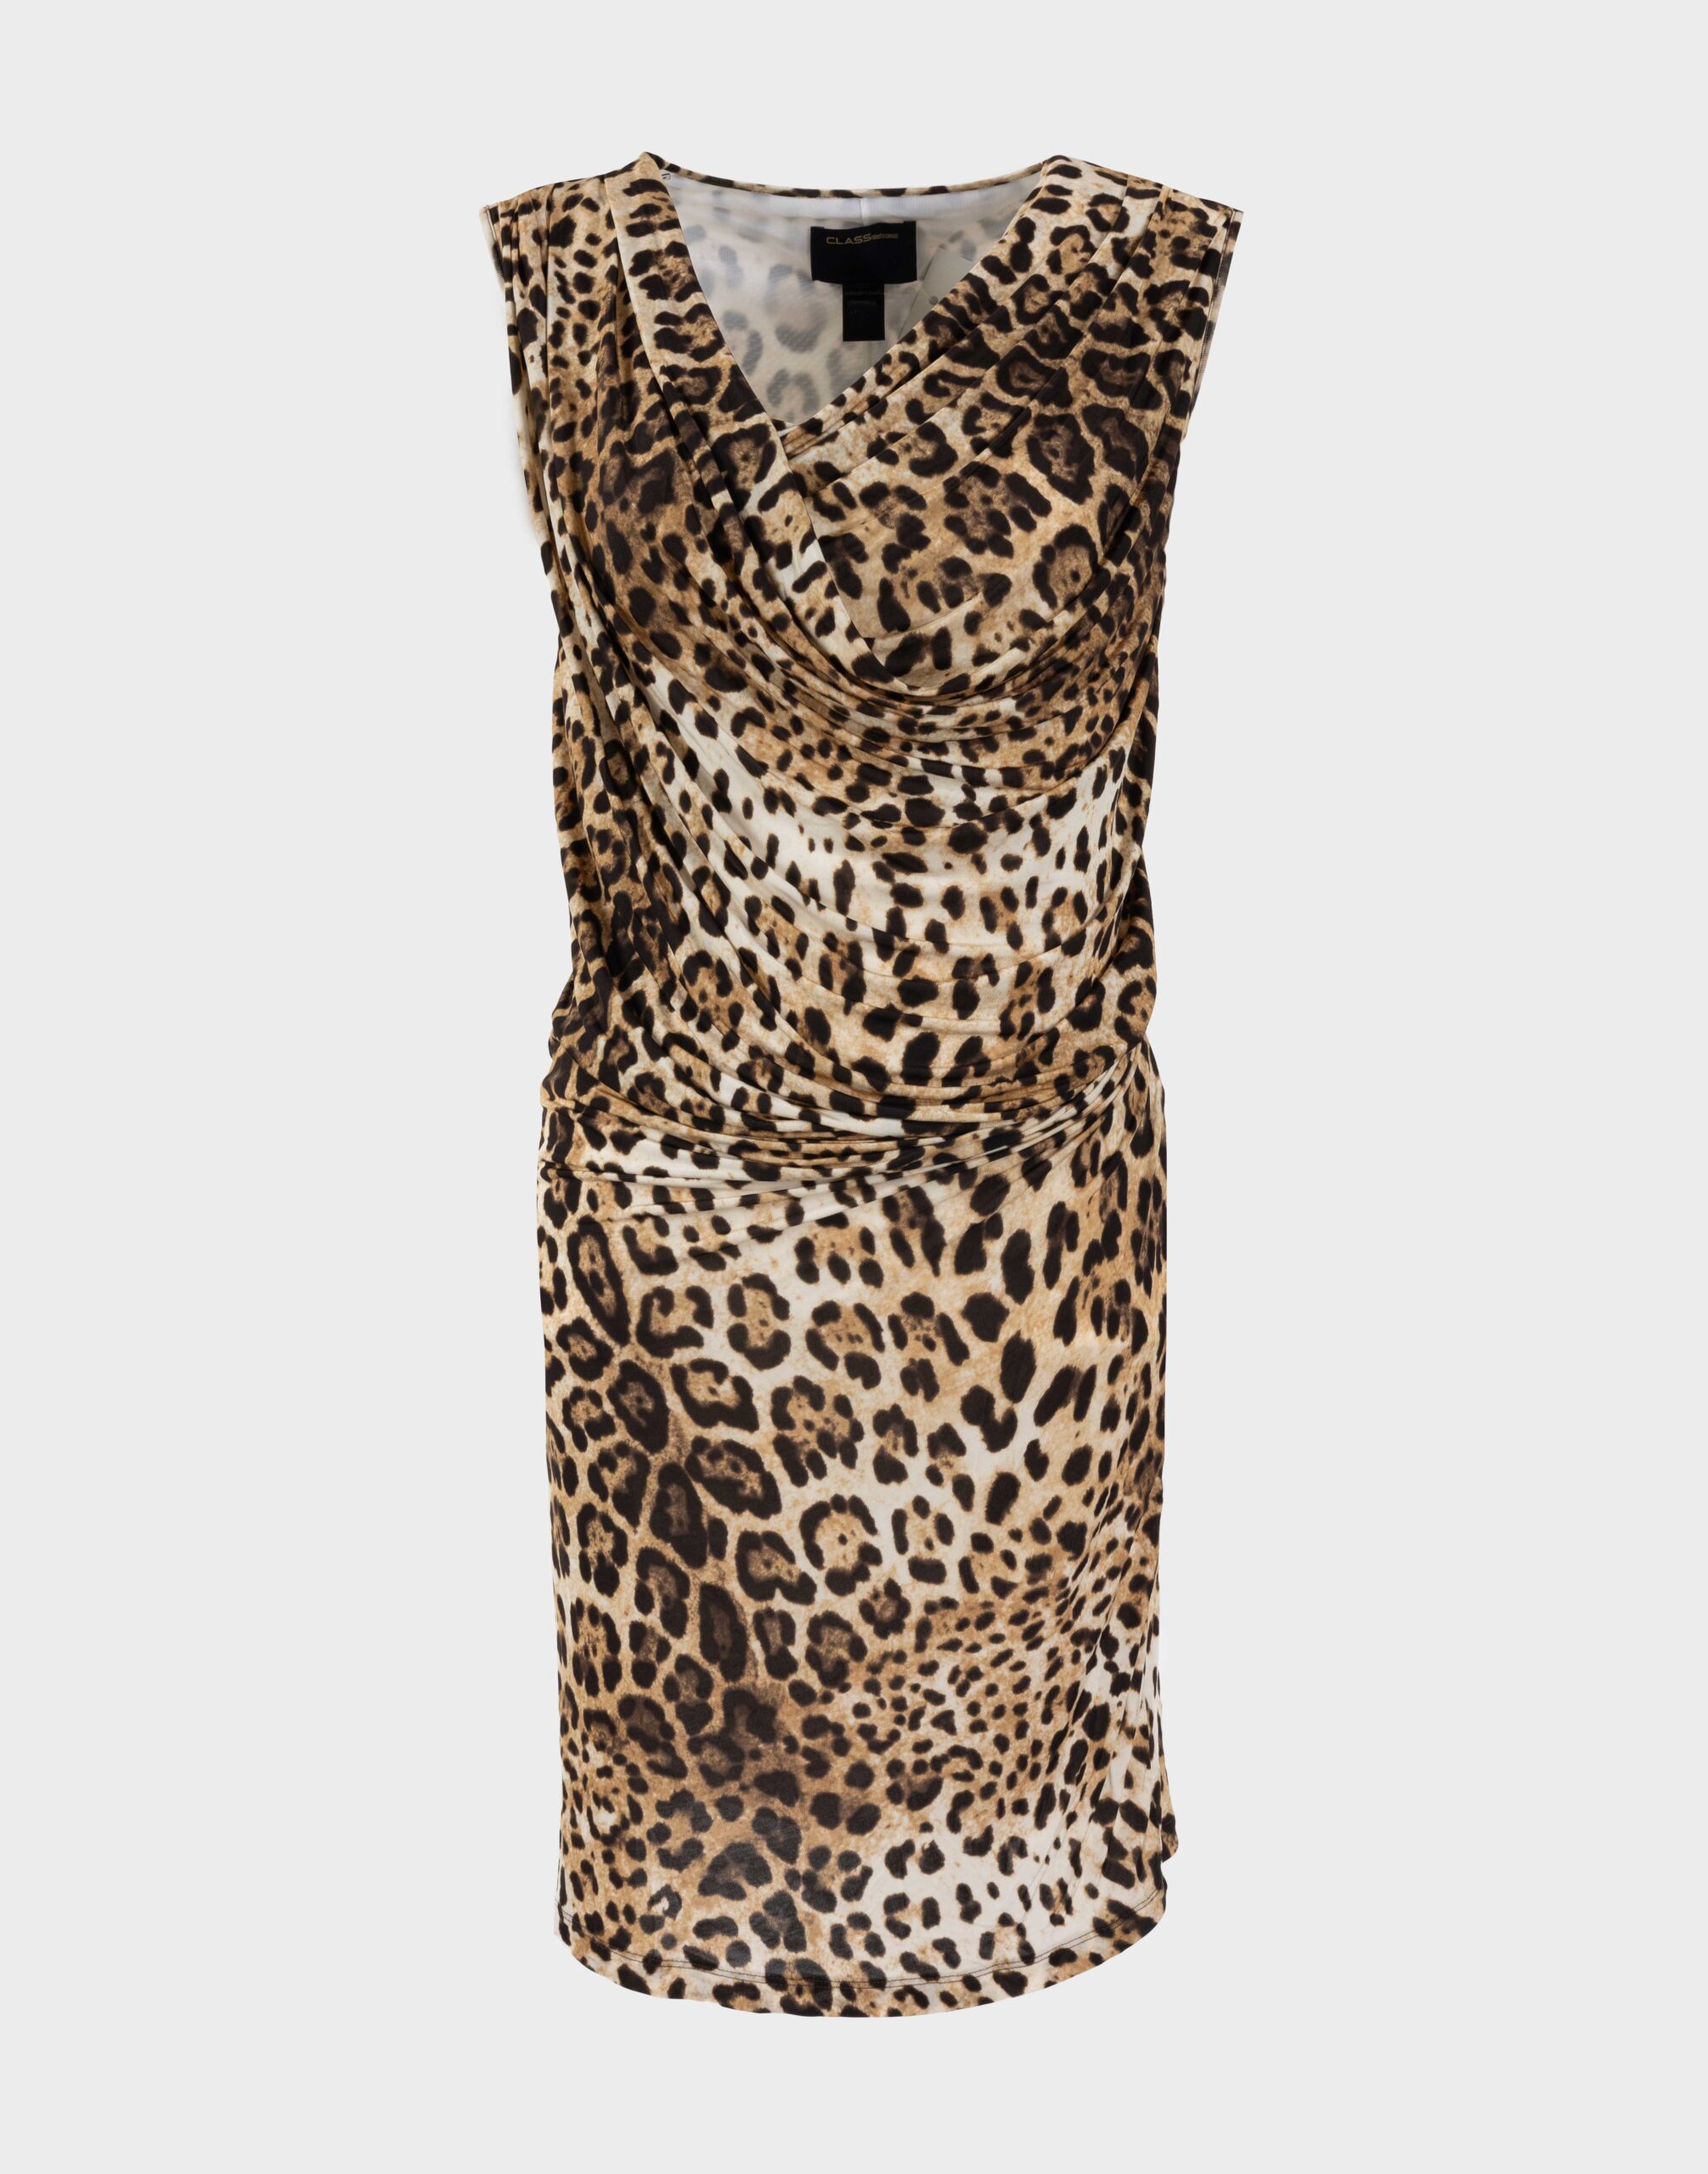 women's stretch dress with animal pattern, sleeveless, shawl neckline and gathering at the side